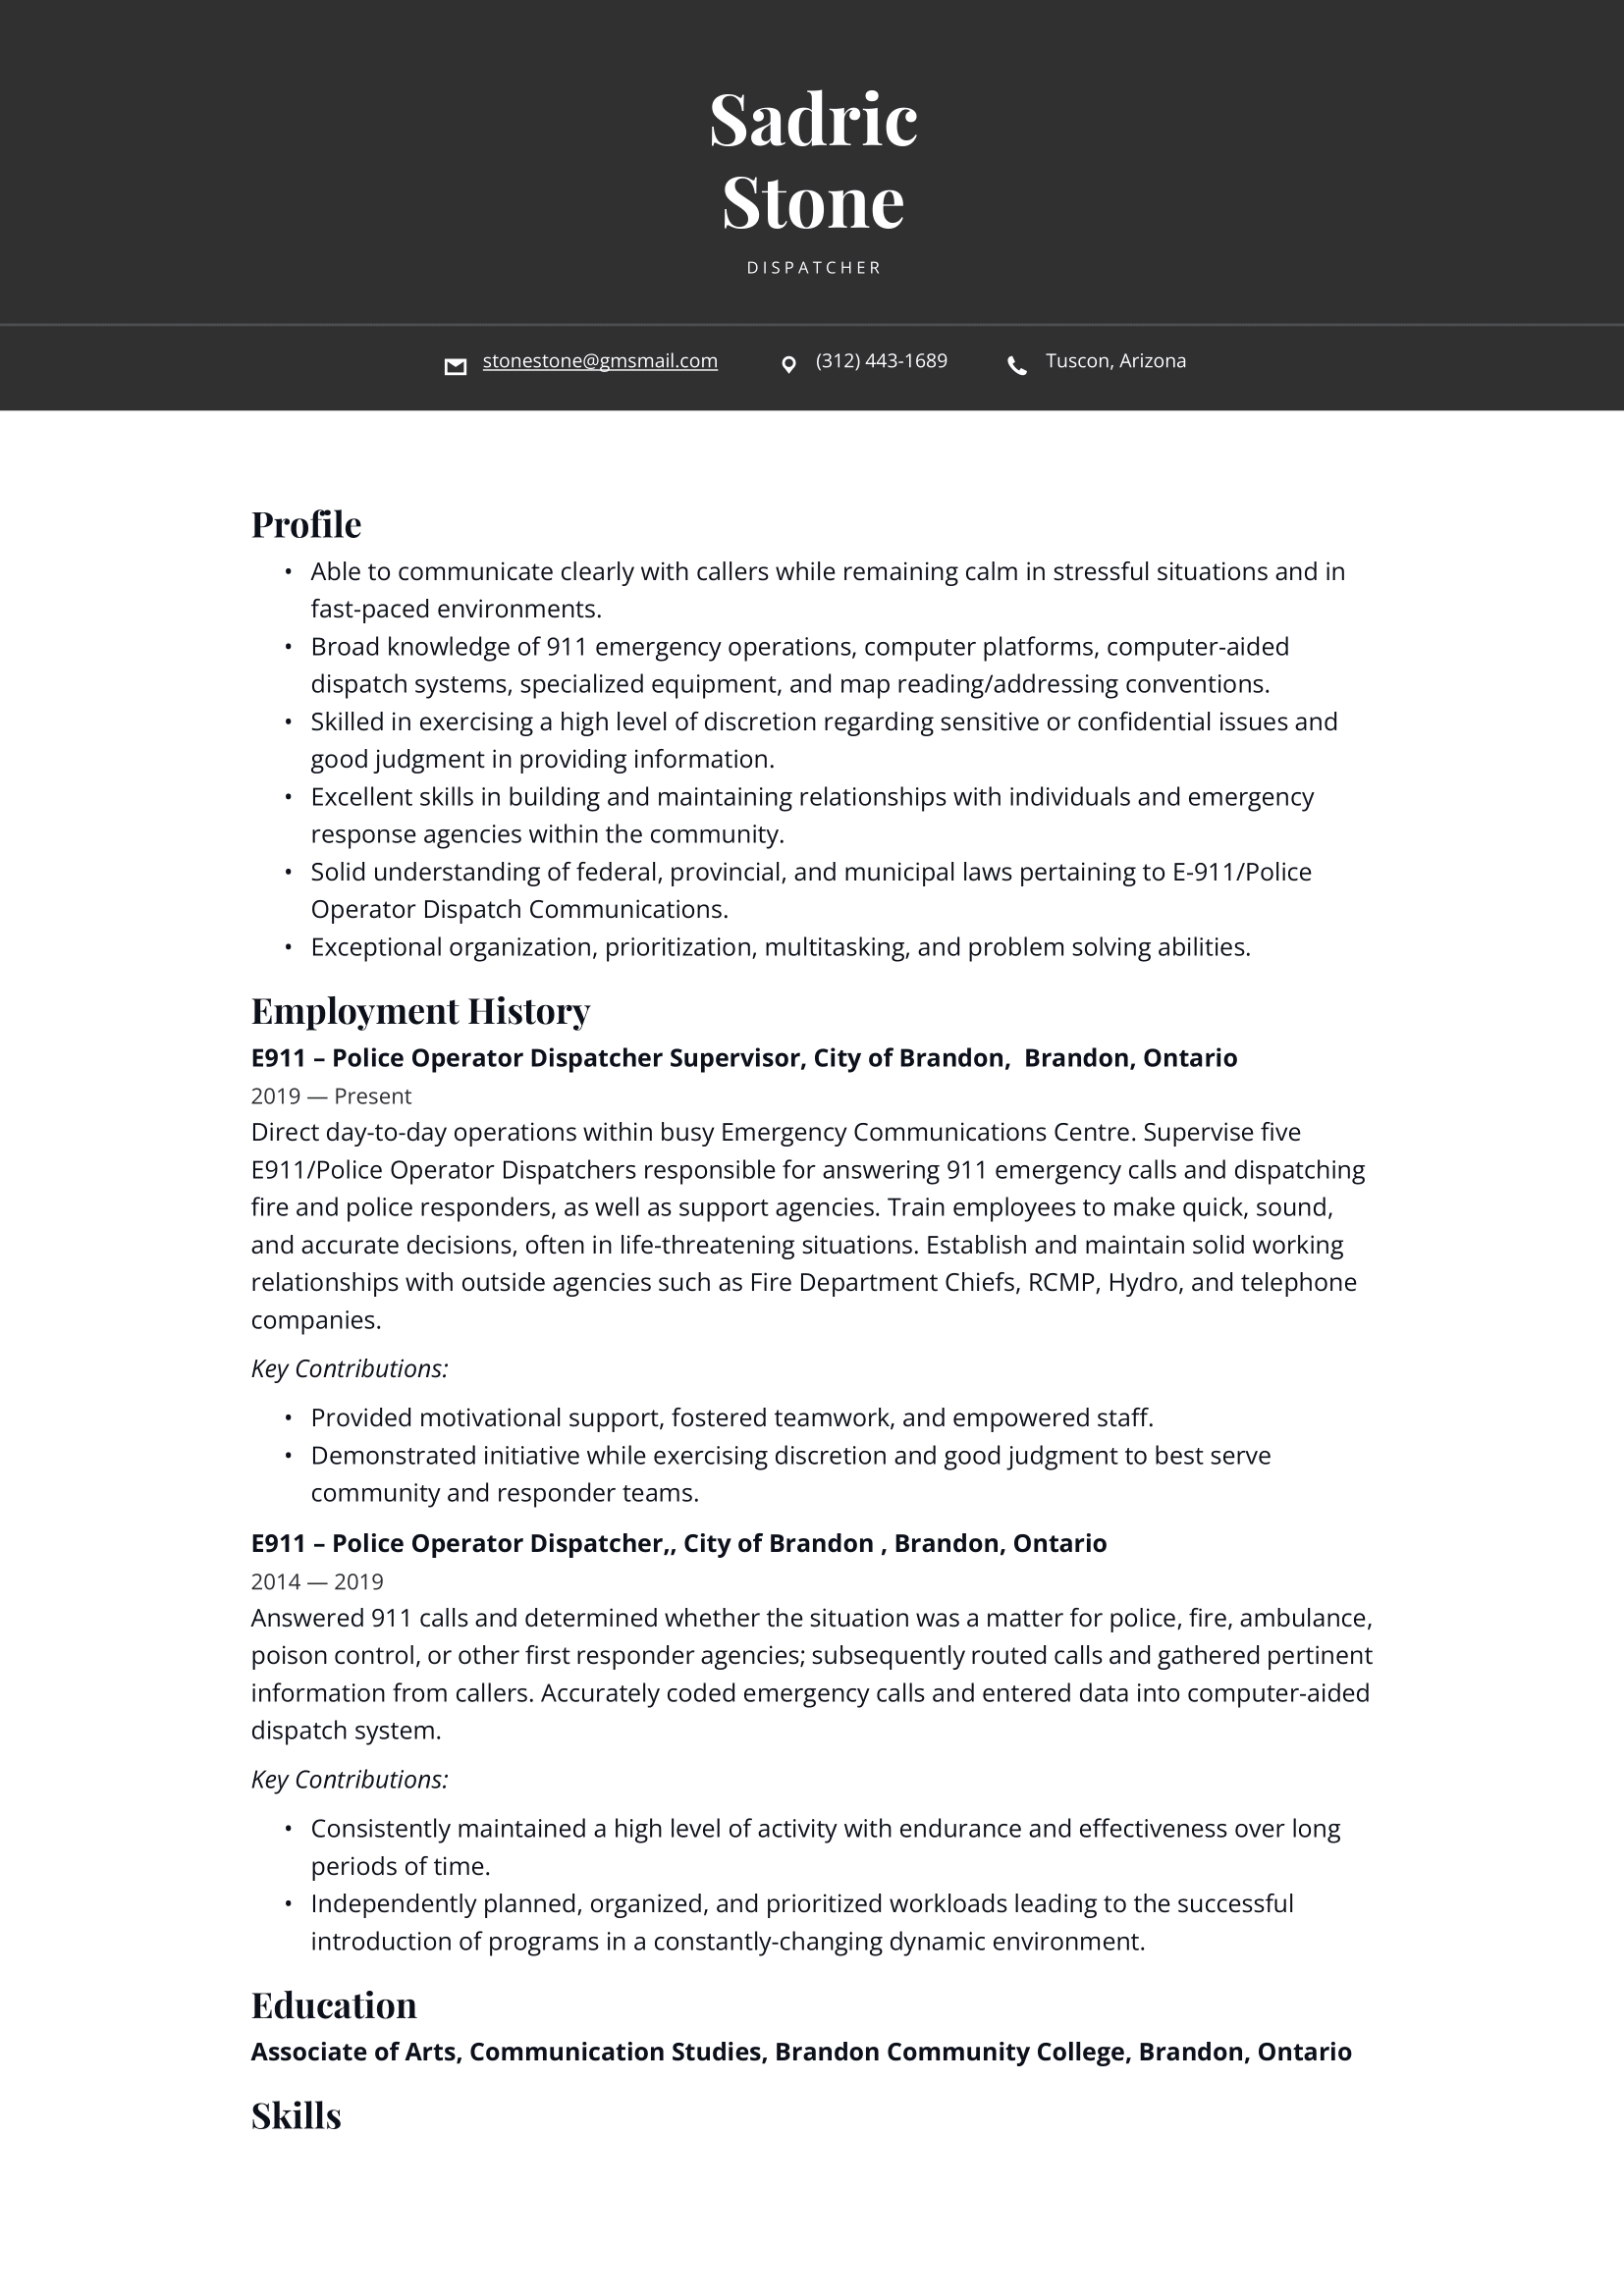 Dispatcher Resume Example & Writing Guide